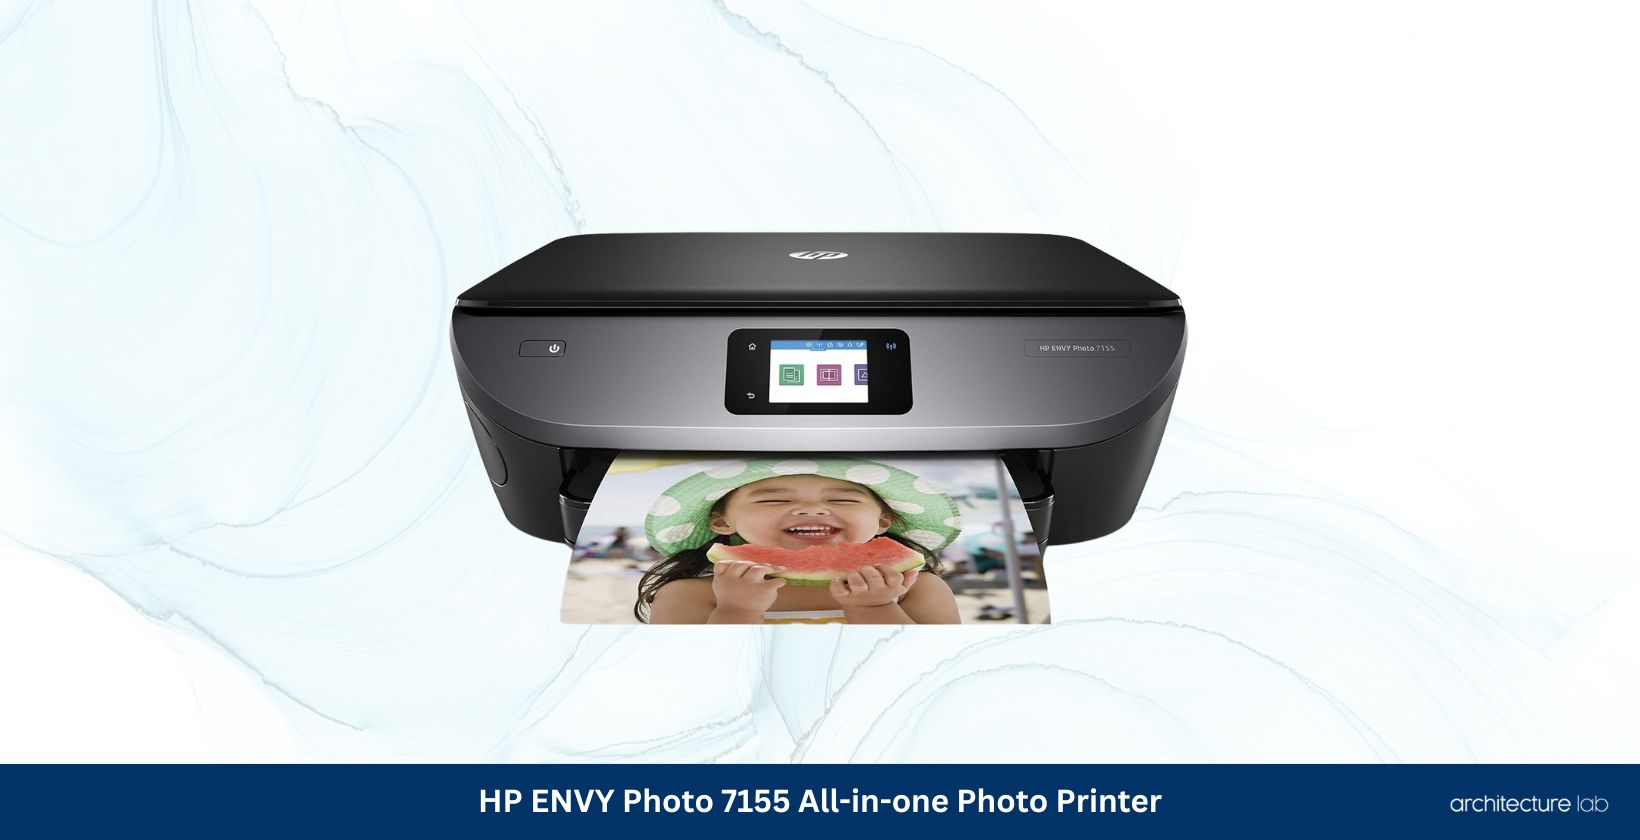 Hp envy photo 7155 all in one photo printer